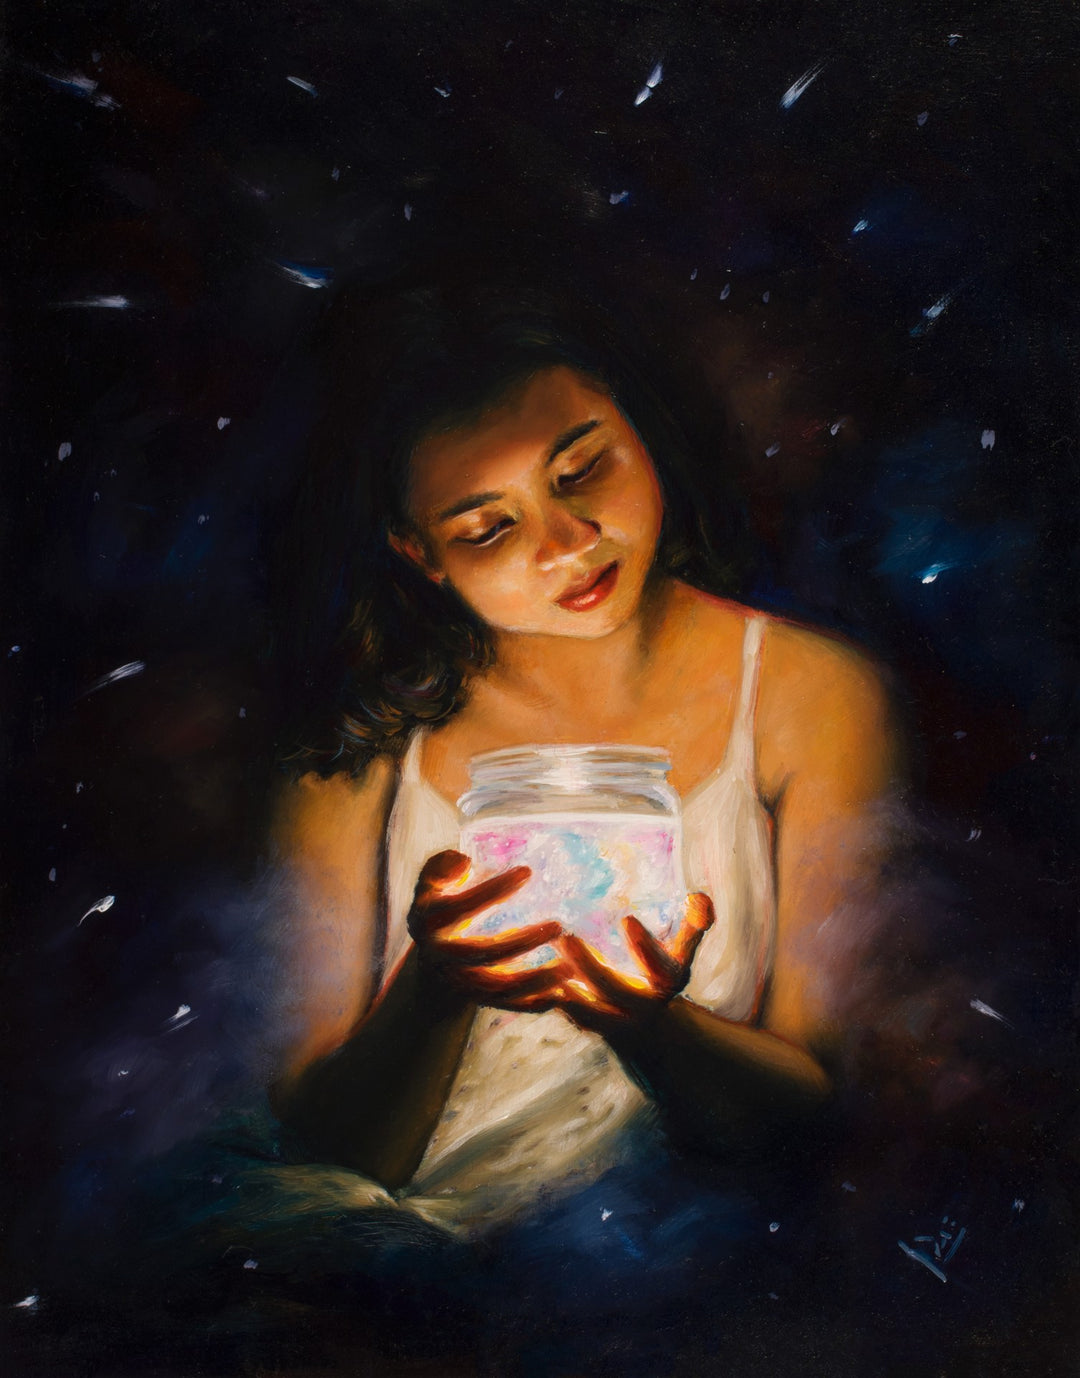 The brand new "Pocket Full of Dreams" by Tiffany Dae is an enchanting painting, featuring a mesmerizing portrayal of a girl delicately grasping a jar brimming with twinkling stars.